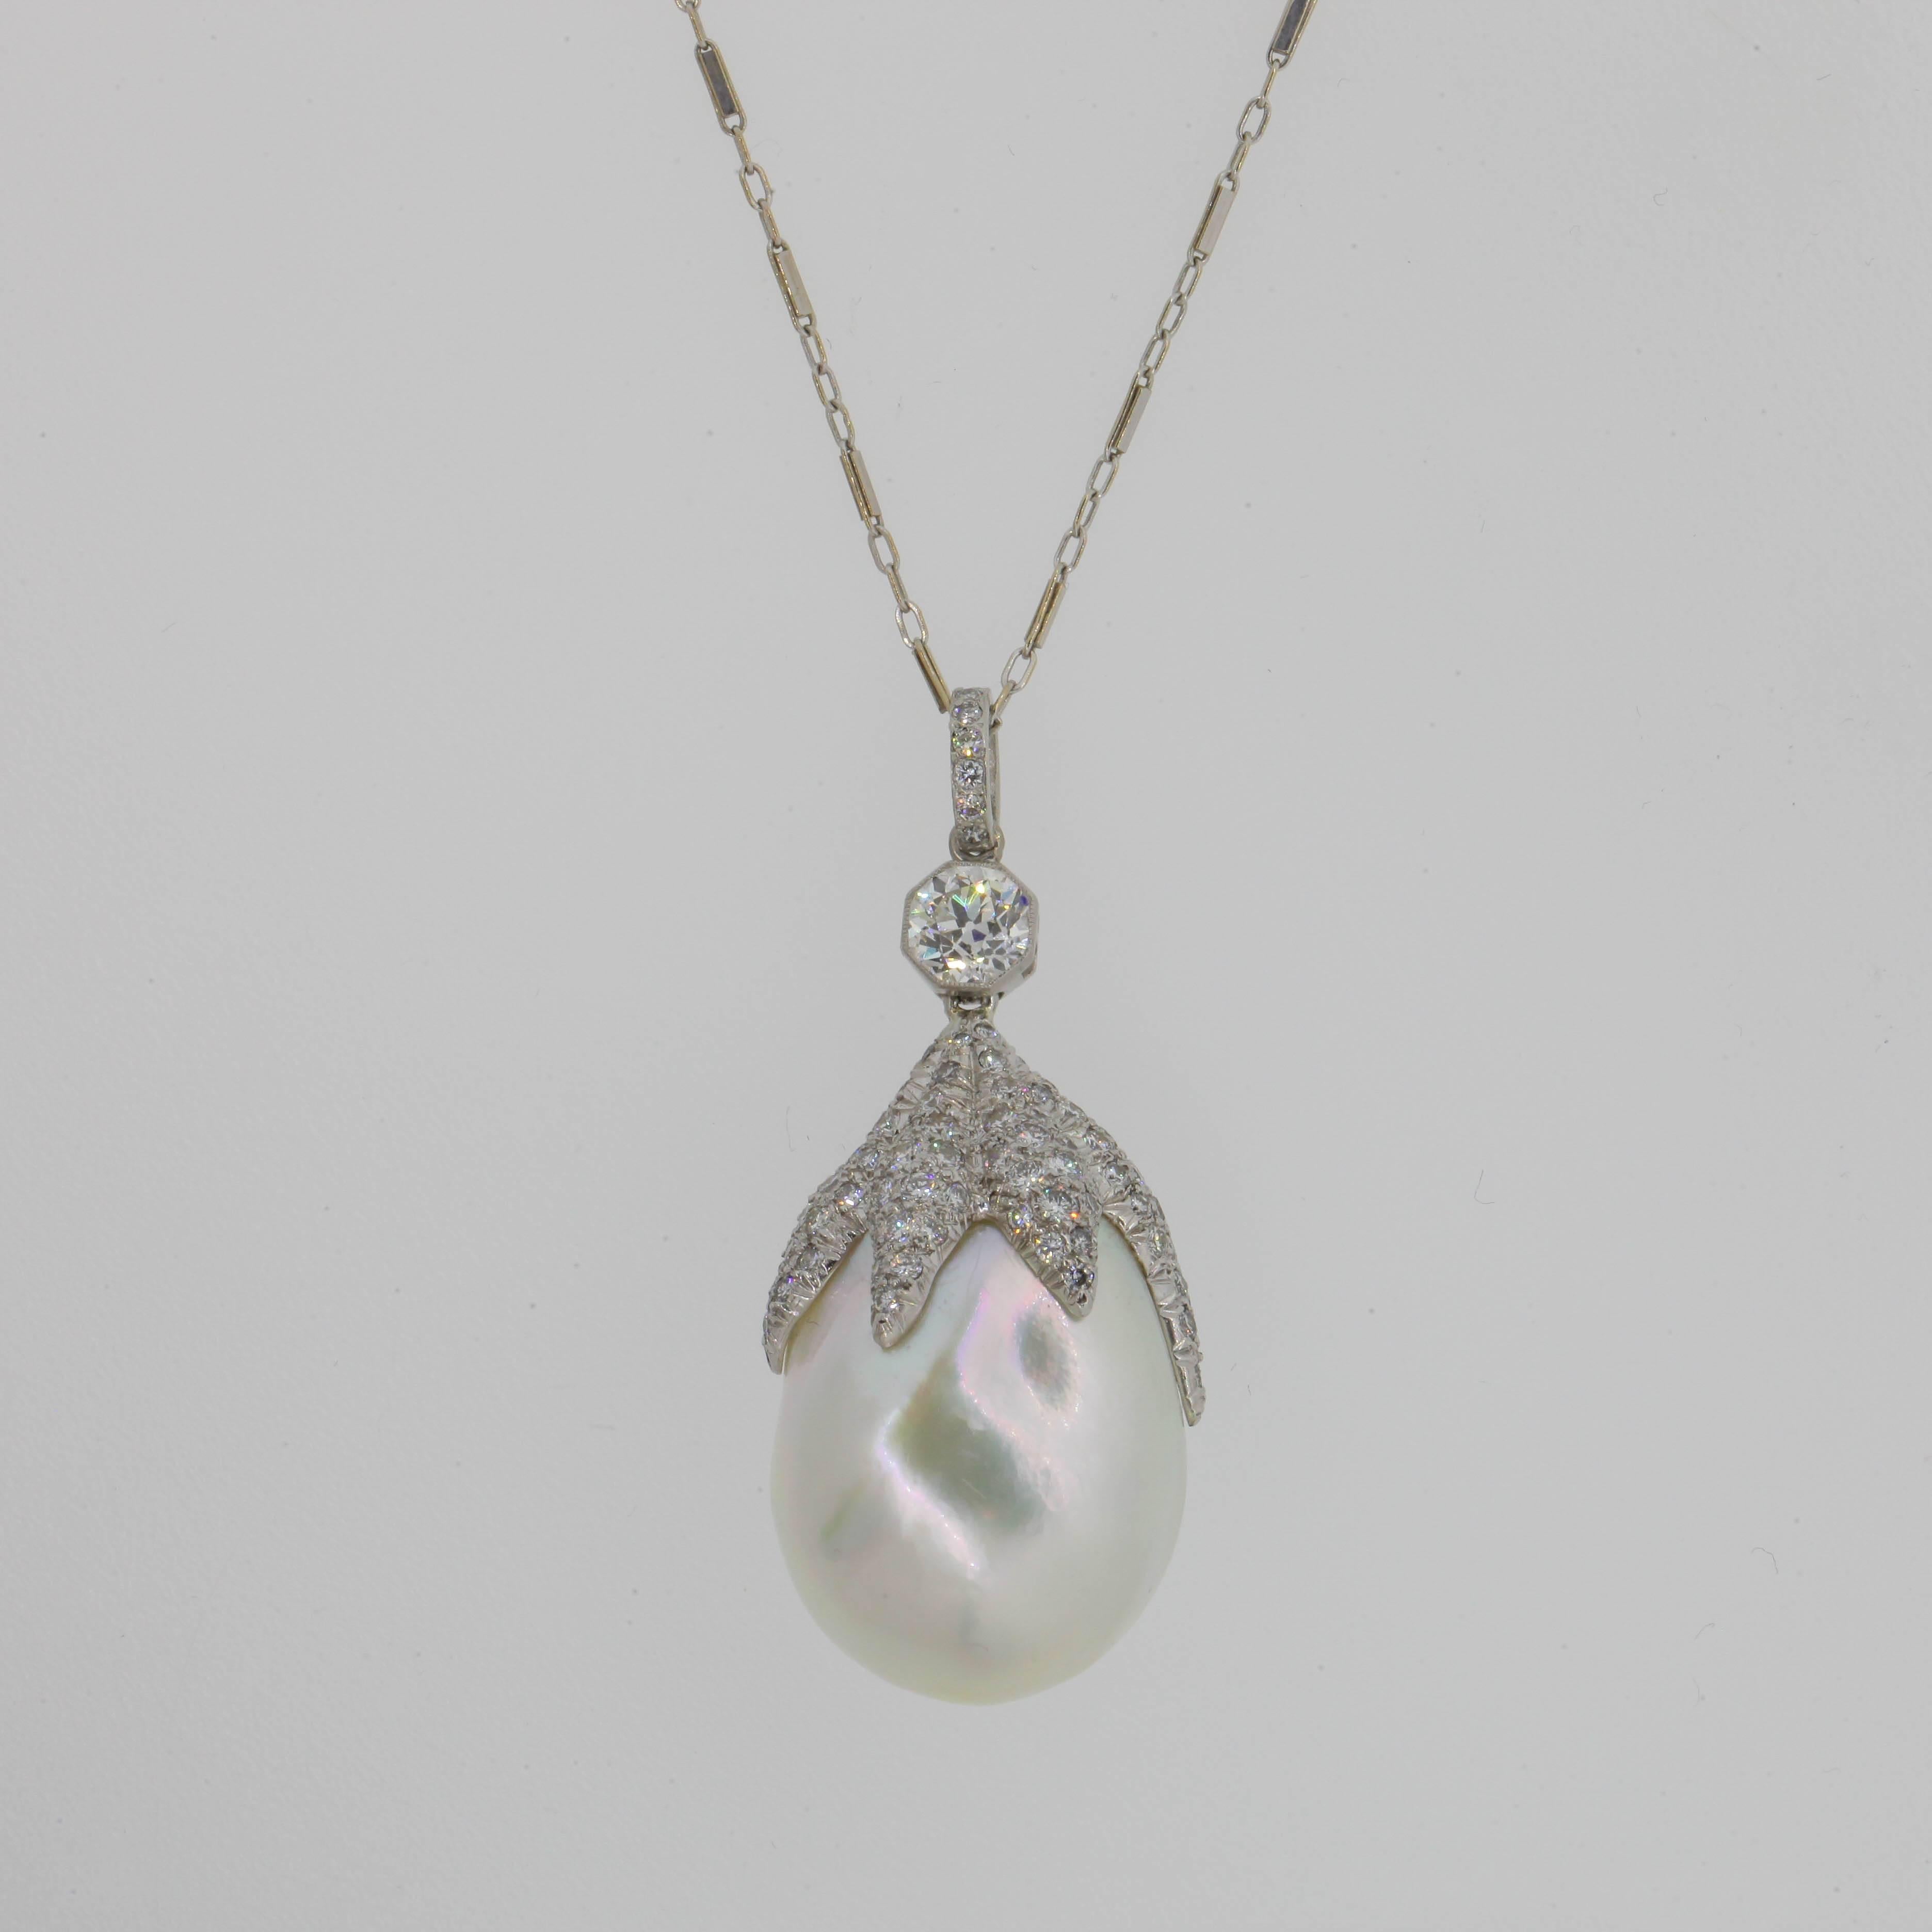 A one of a kind  26 x 19.5 mm large Baroque Pearl with rainbow overtones.  This lustrous Pearl is set with a six branch pave cap dangling from a bezel set 0.88 carat Old European Cut Diamond.  Circa 1970s.